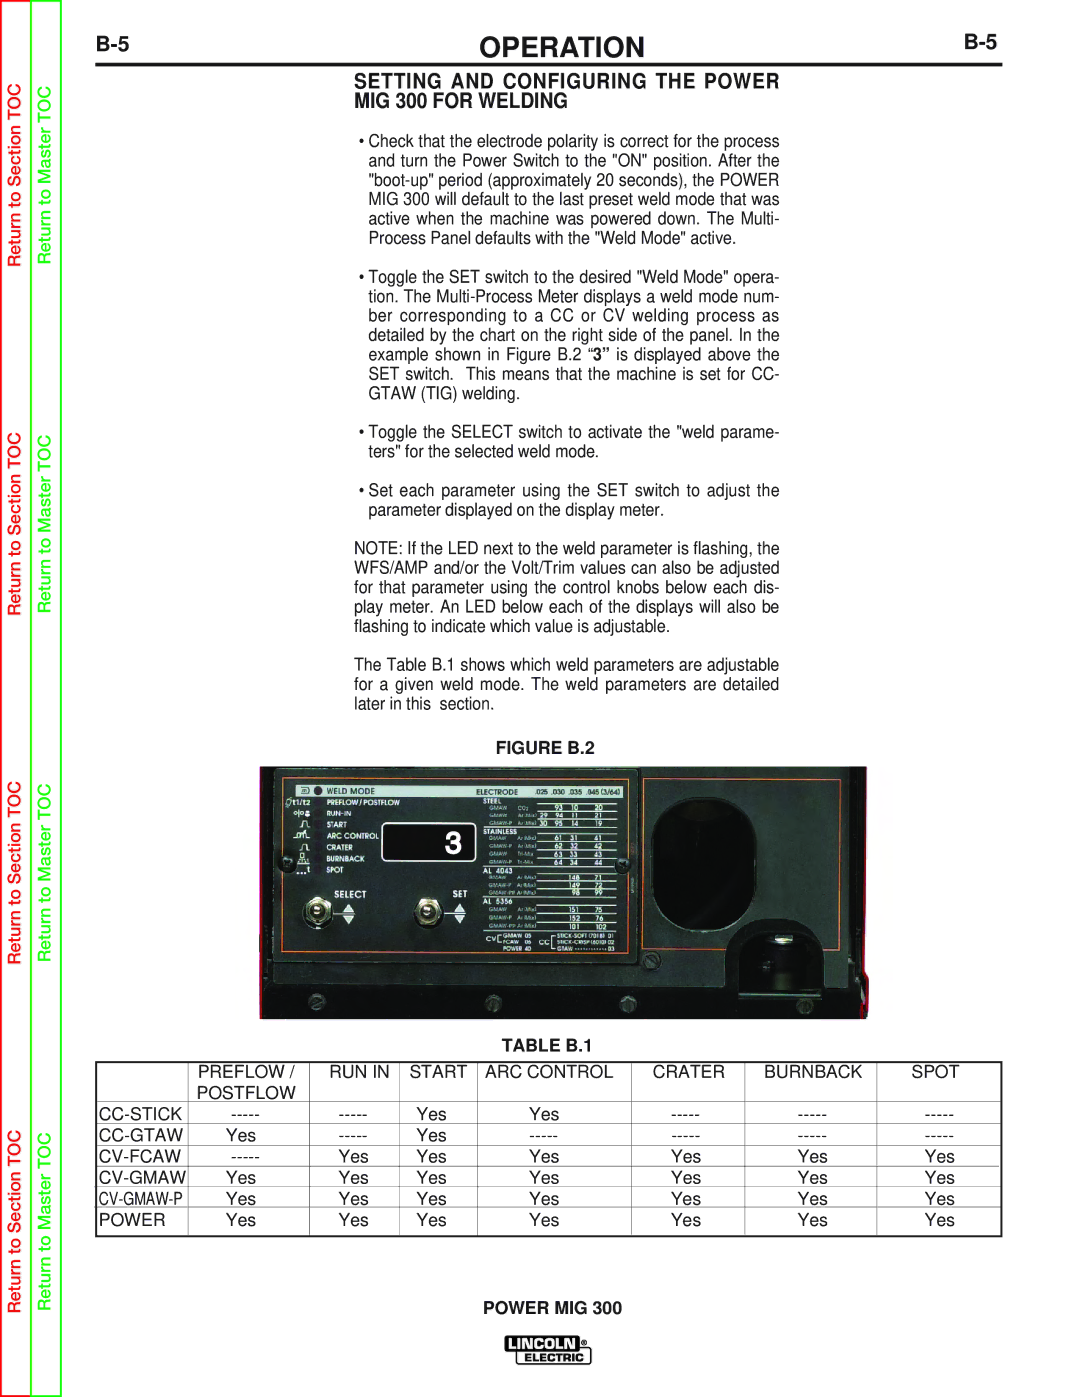 Lincoln Electric SVM160-B service manual 5OPERATIONB-5, Setting and Configuring the Power MIG 300 for Welding 